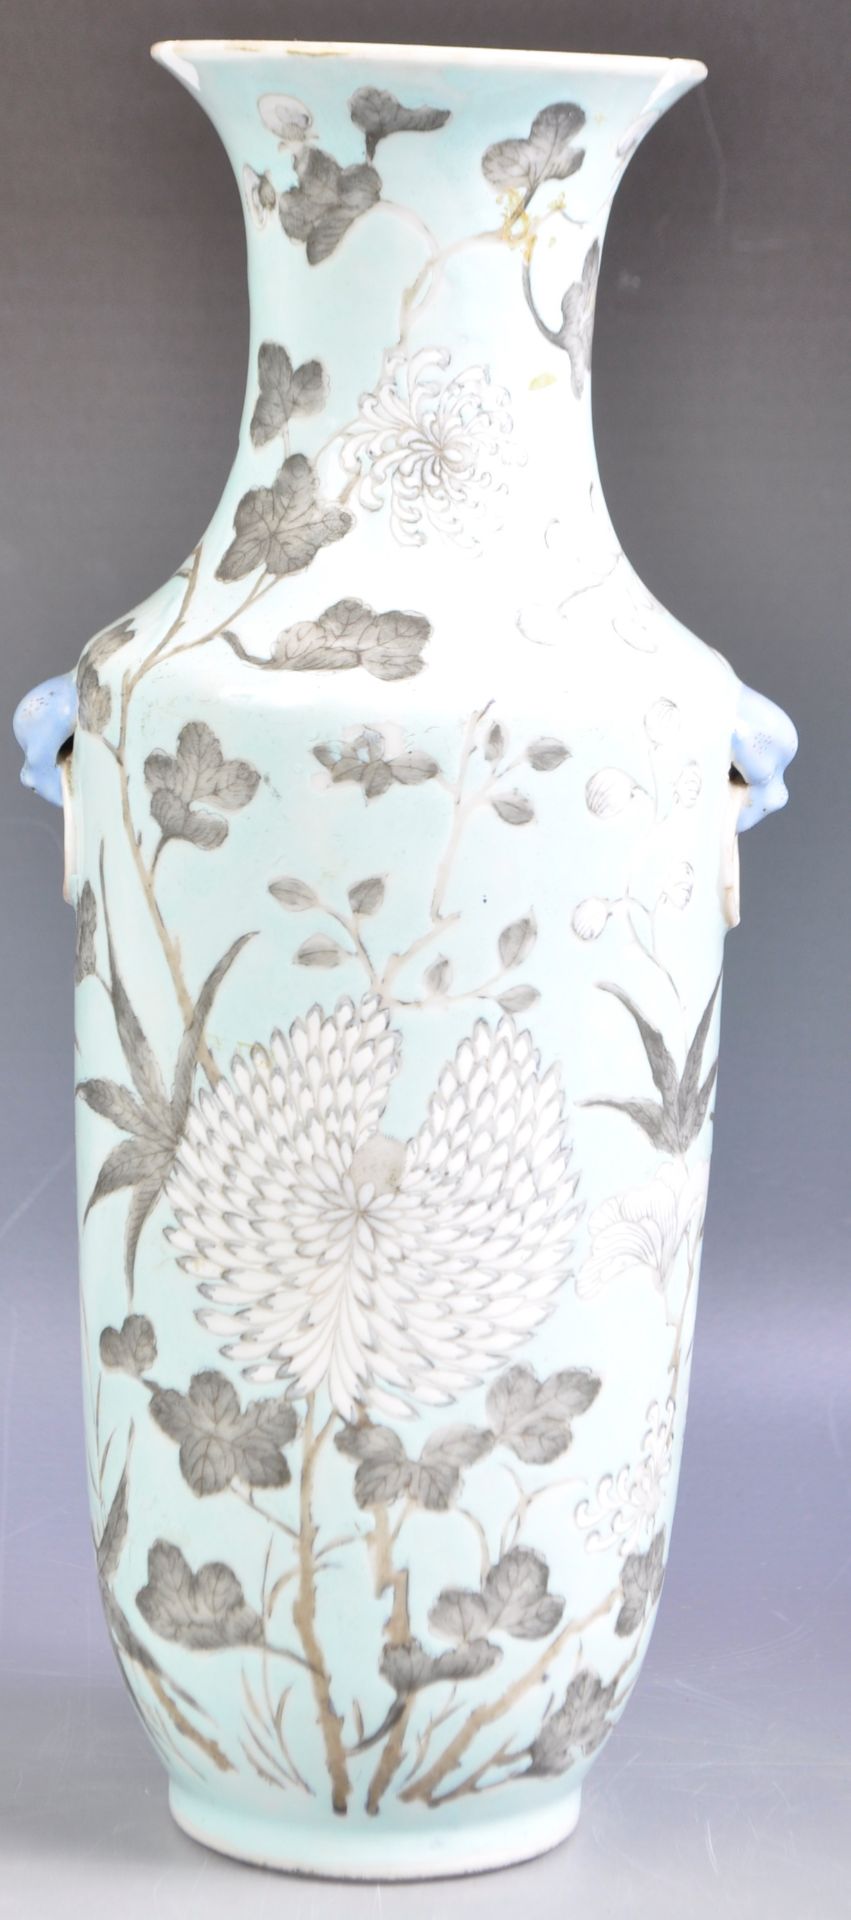 ANTIQUE 19TH CENTURY CHINESE PORCELAIN ROULEAU VASE IN TEAL